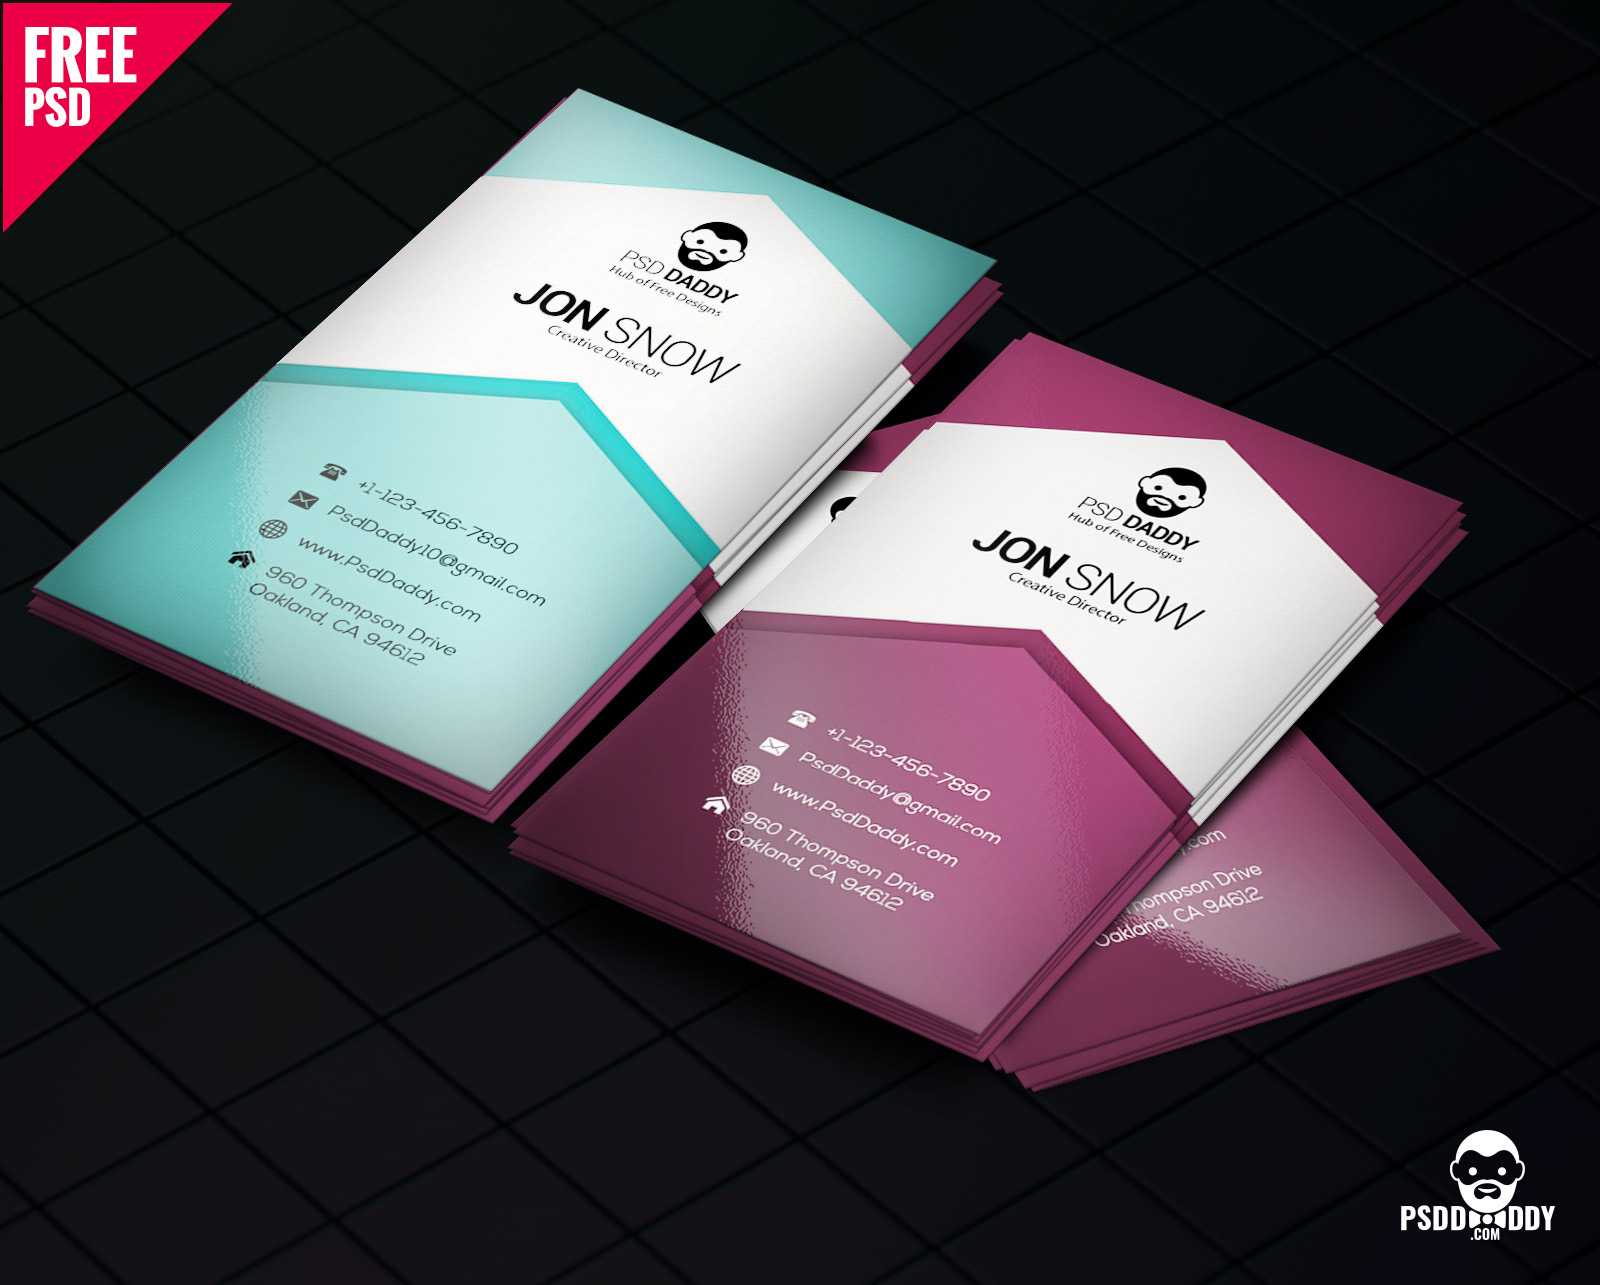 Download]Creative Business Card Psd Free | Psddaddy Intended For Creative Business Card Templates Psd